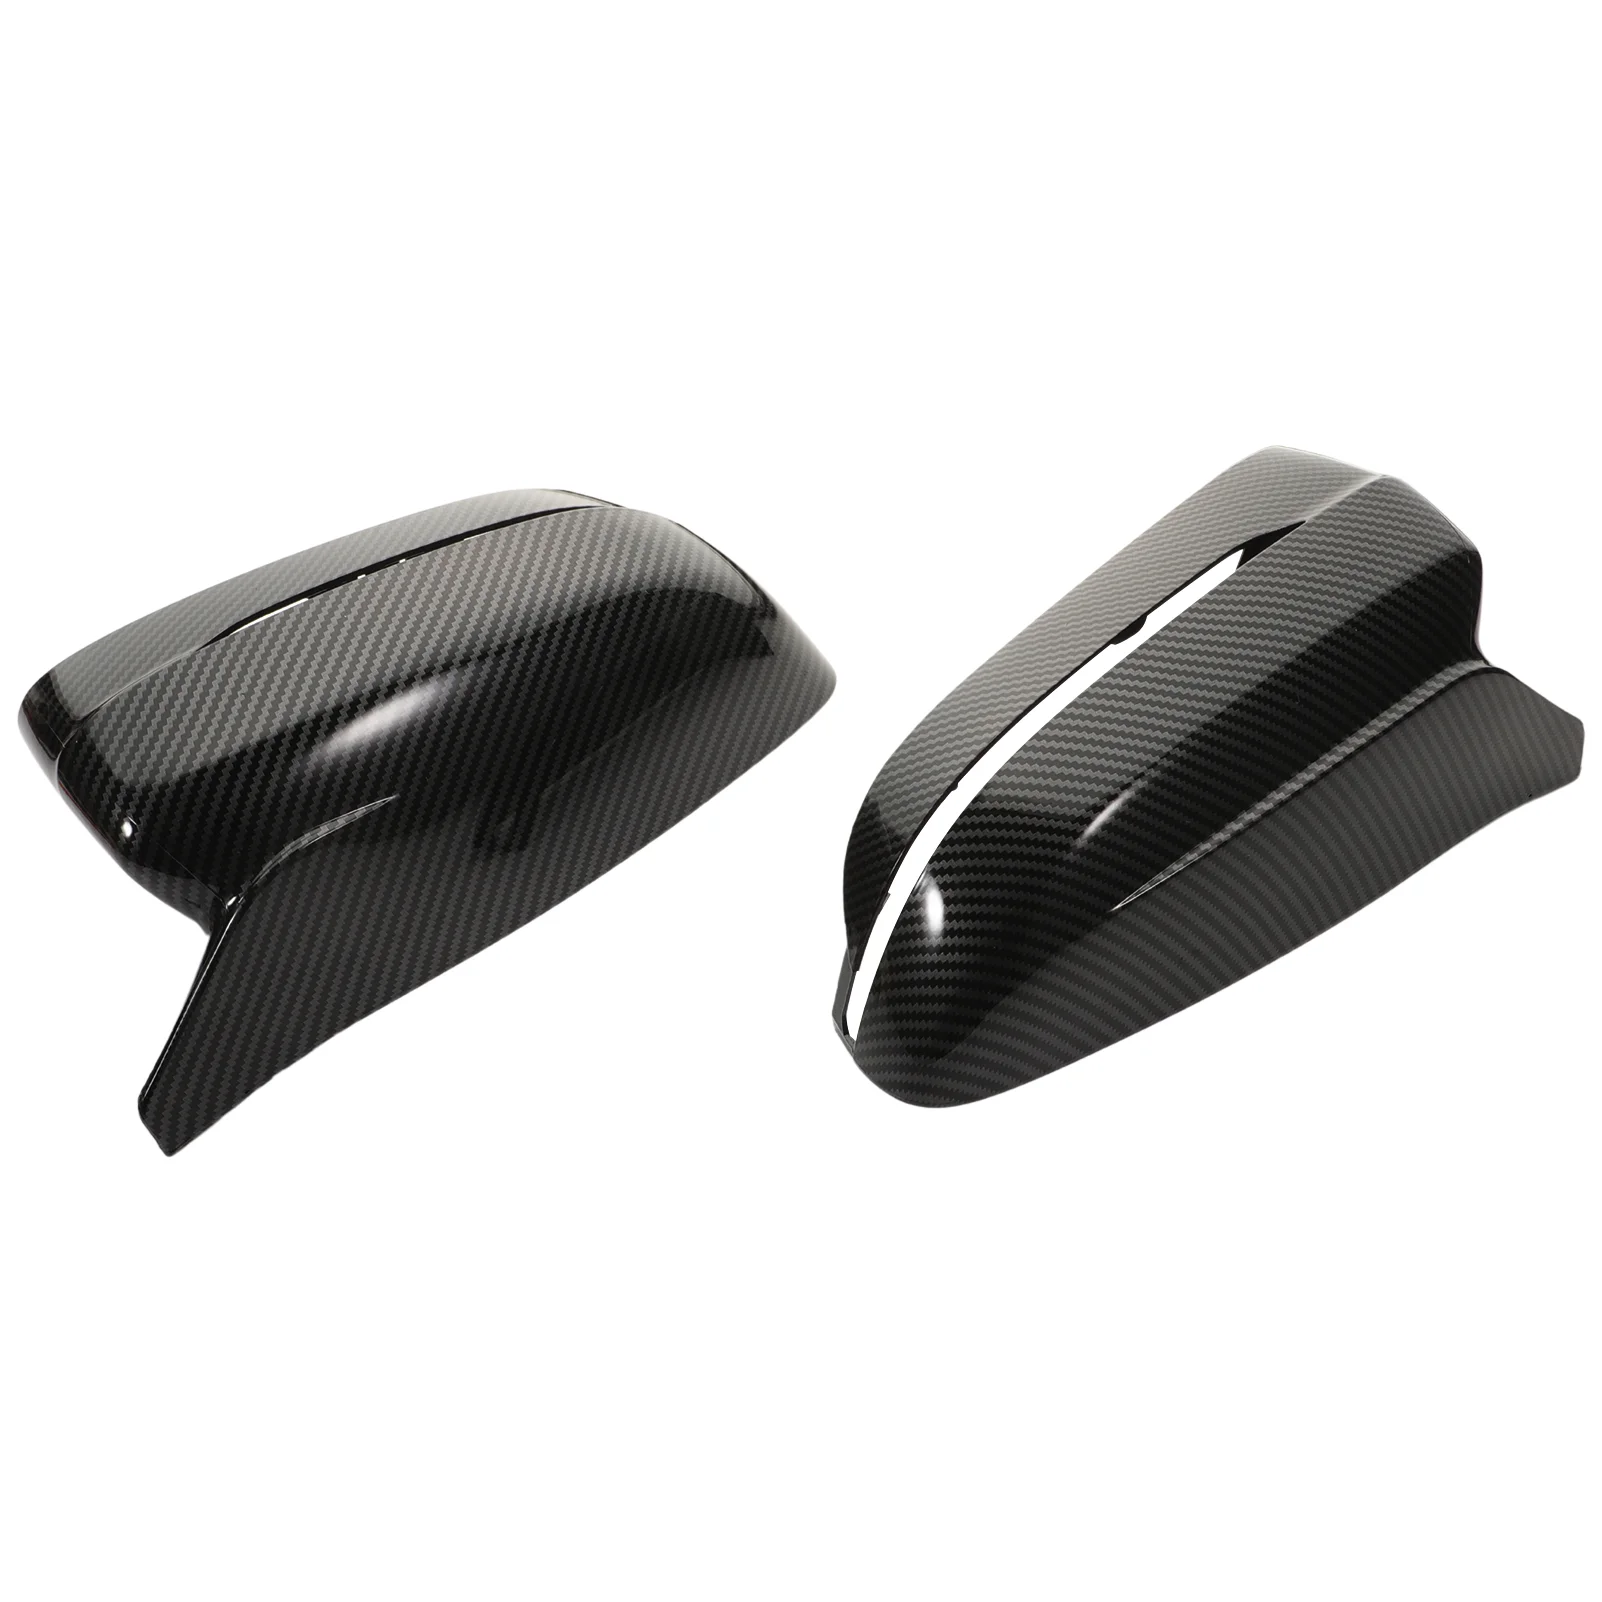 

Mirror Caps For BMW 3 5 6 7 Series for G30 G31 G38 G20 G21 G28 G32 G11 G12 G14 G15 Exterior Tuning Accessories - Left Hand